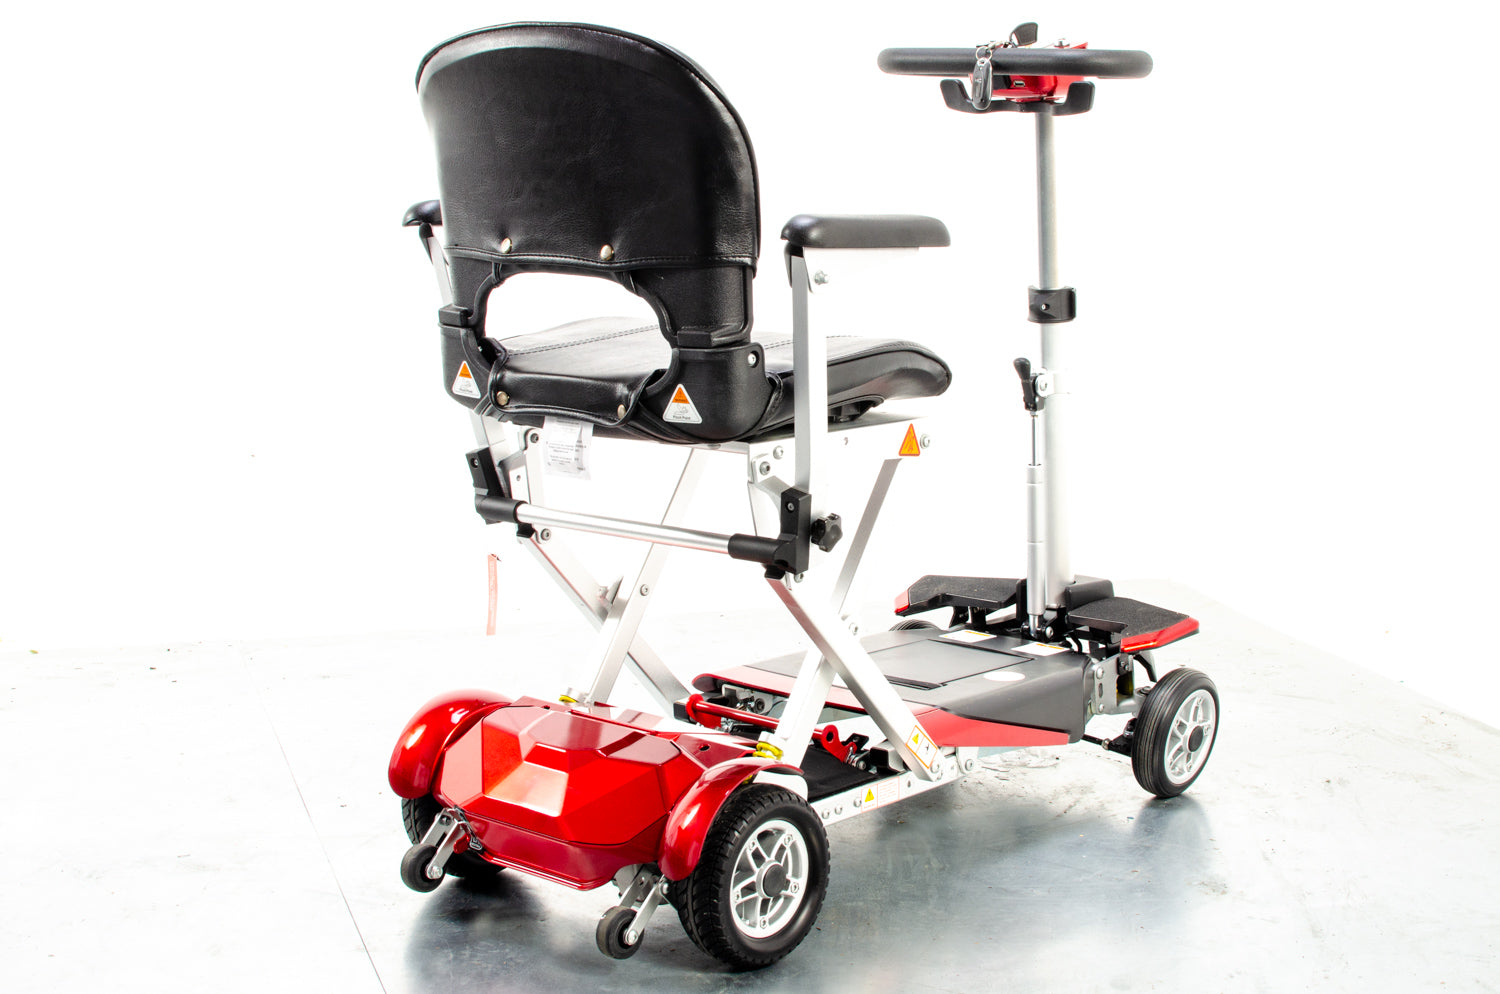 Drive Autofold Elite Folding Mobility Scooter with Suspension